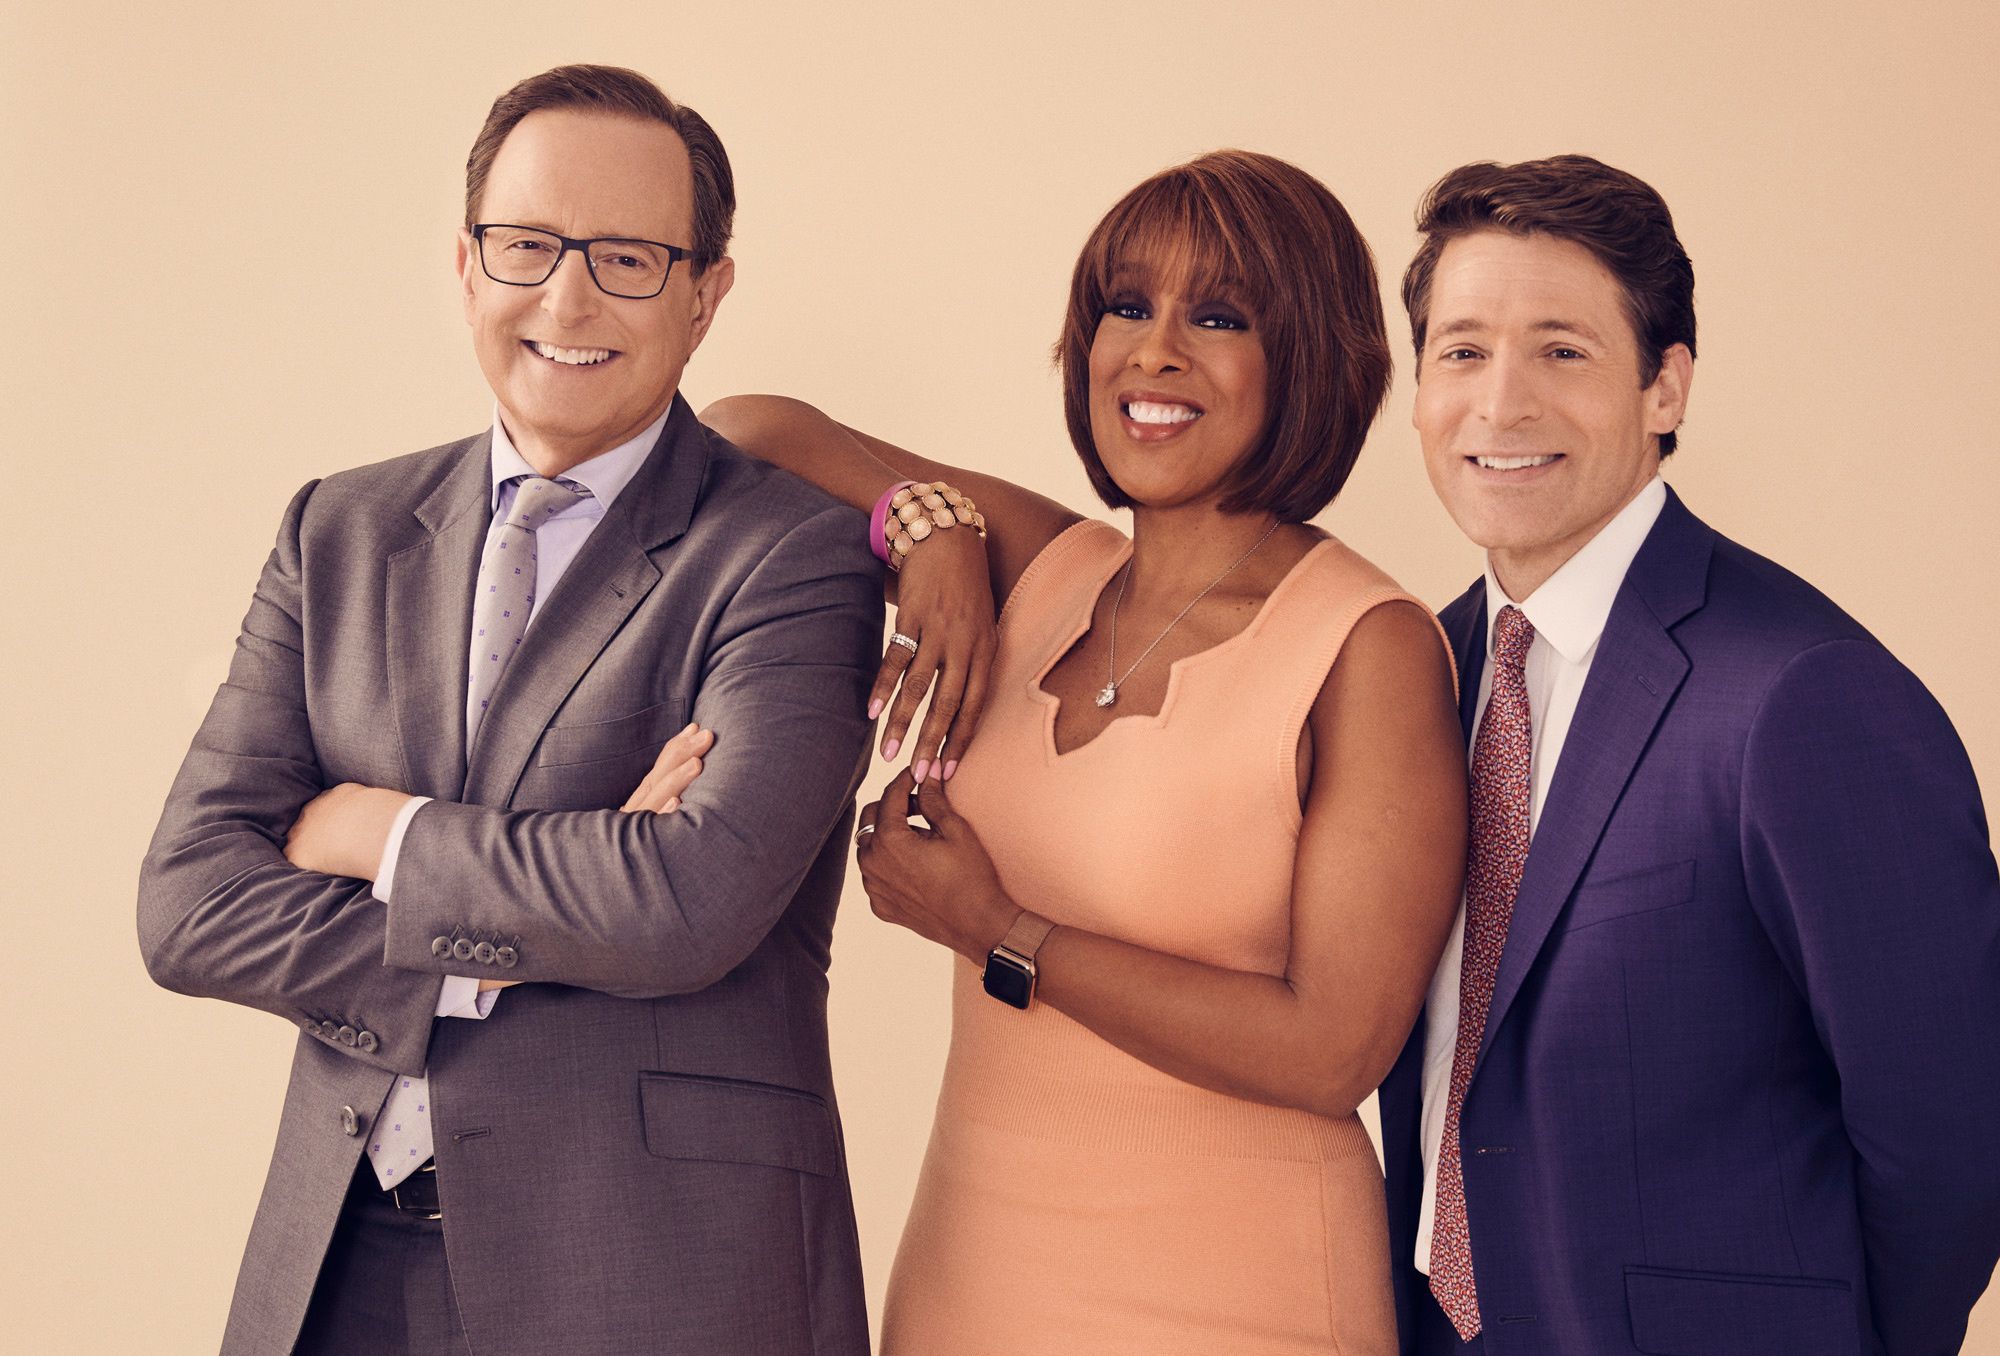 Gayle King, Anthony Mason, and Tony Dokoupil of CBS This Morning